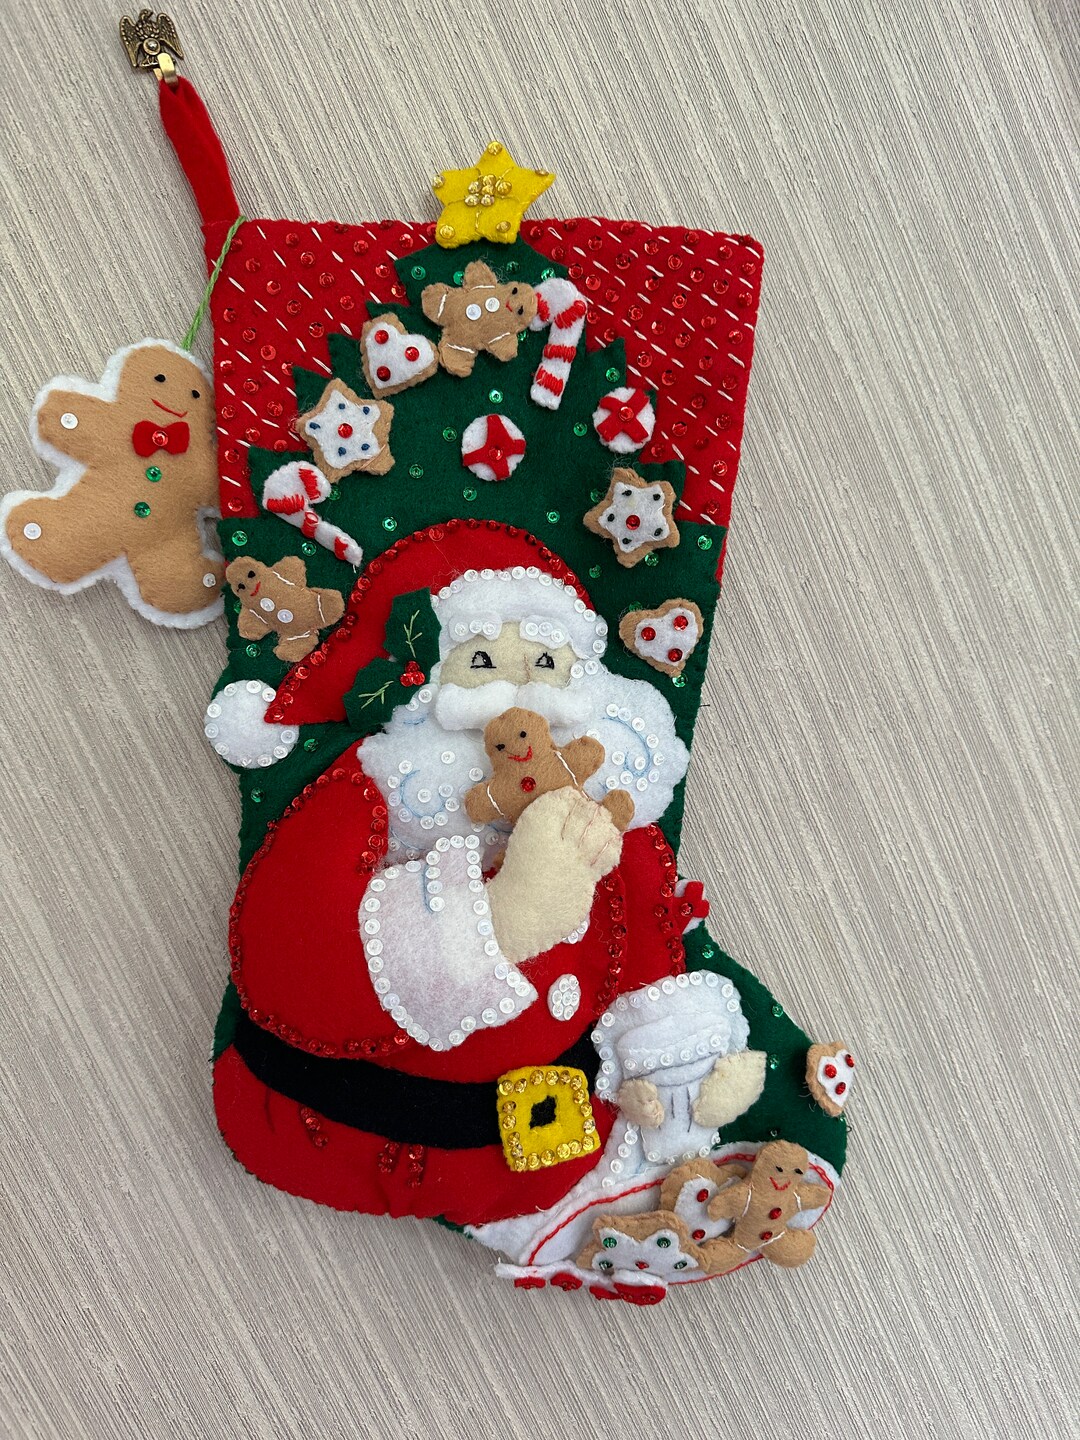 Snack Time Completed Handmade Felt Christmas Stocking From Bucilla Kit ...